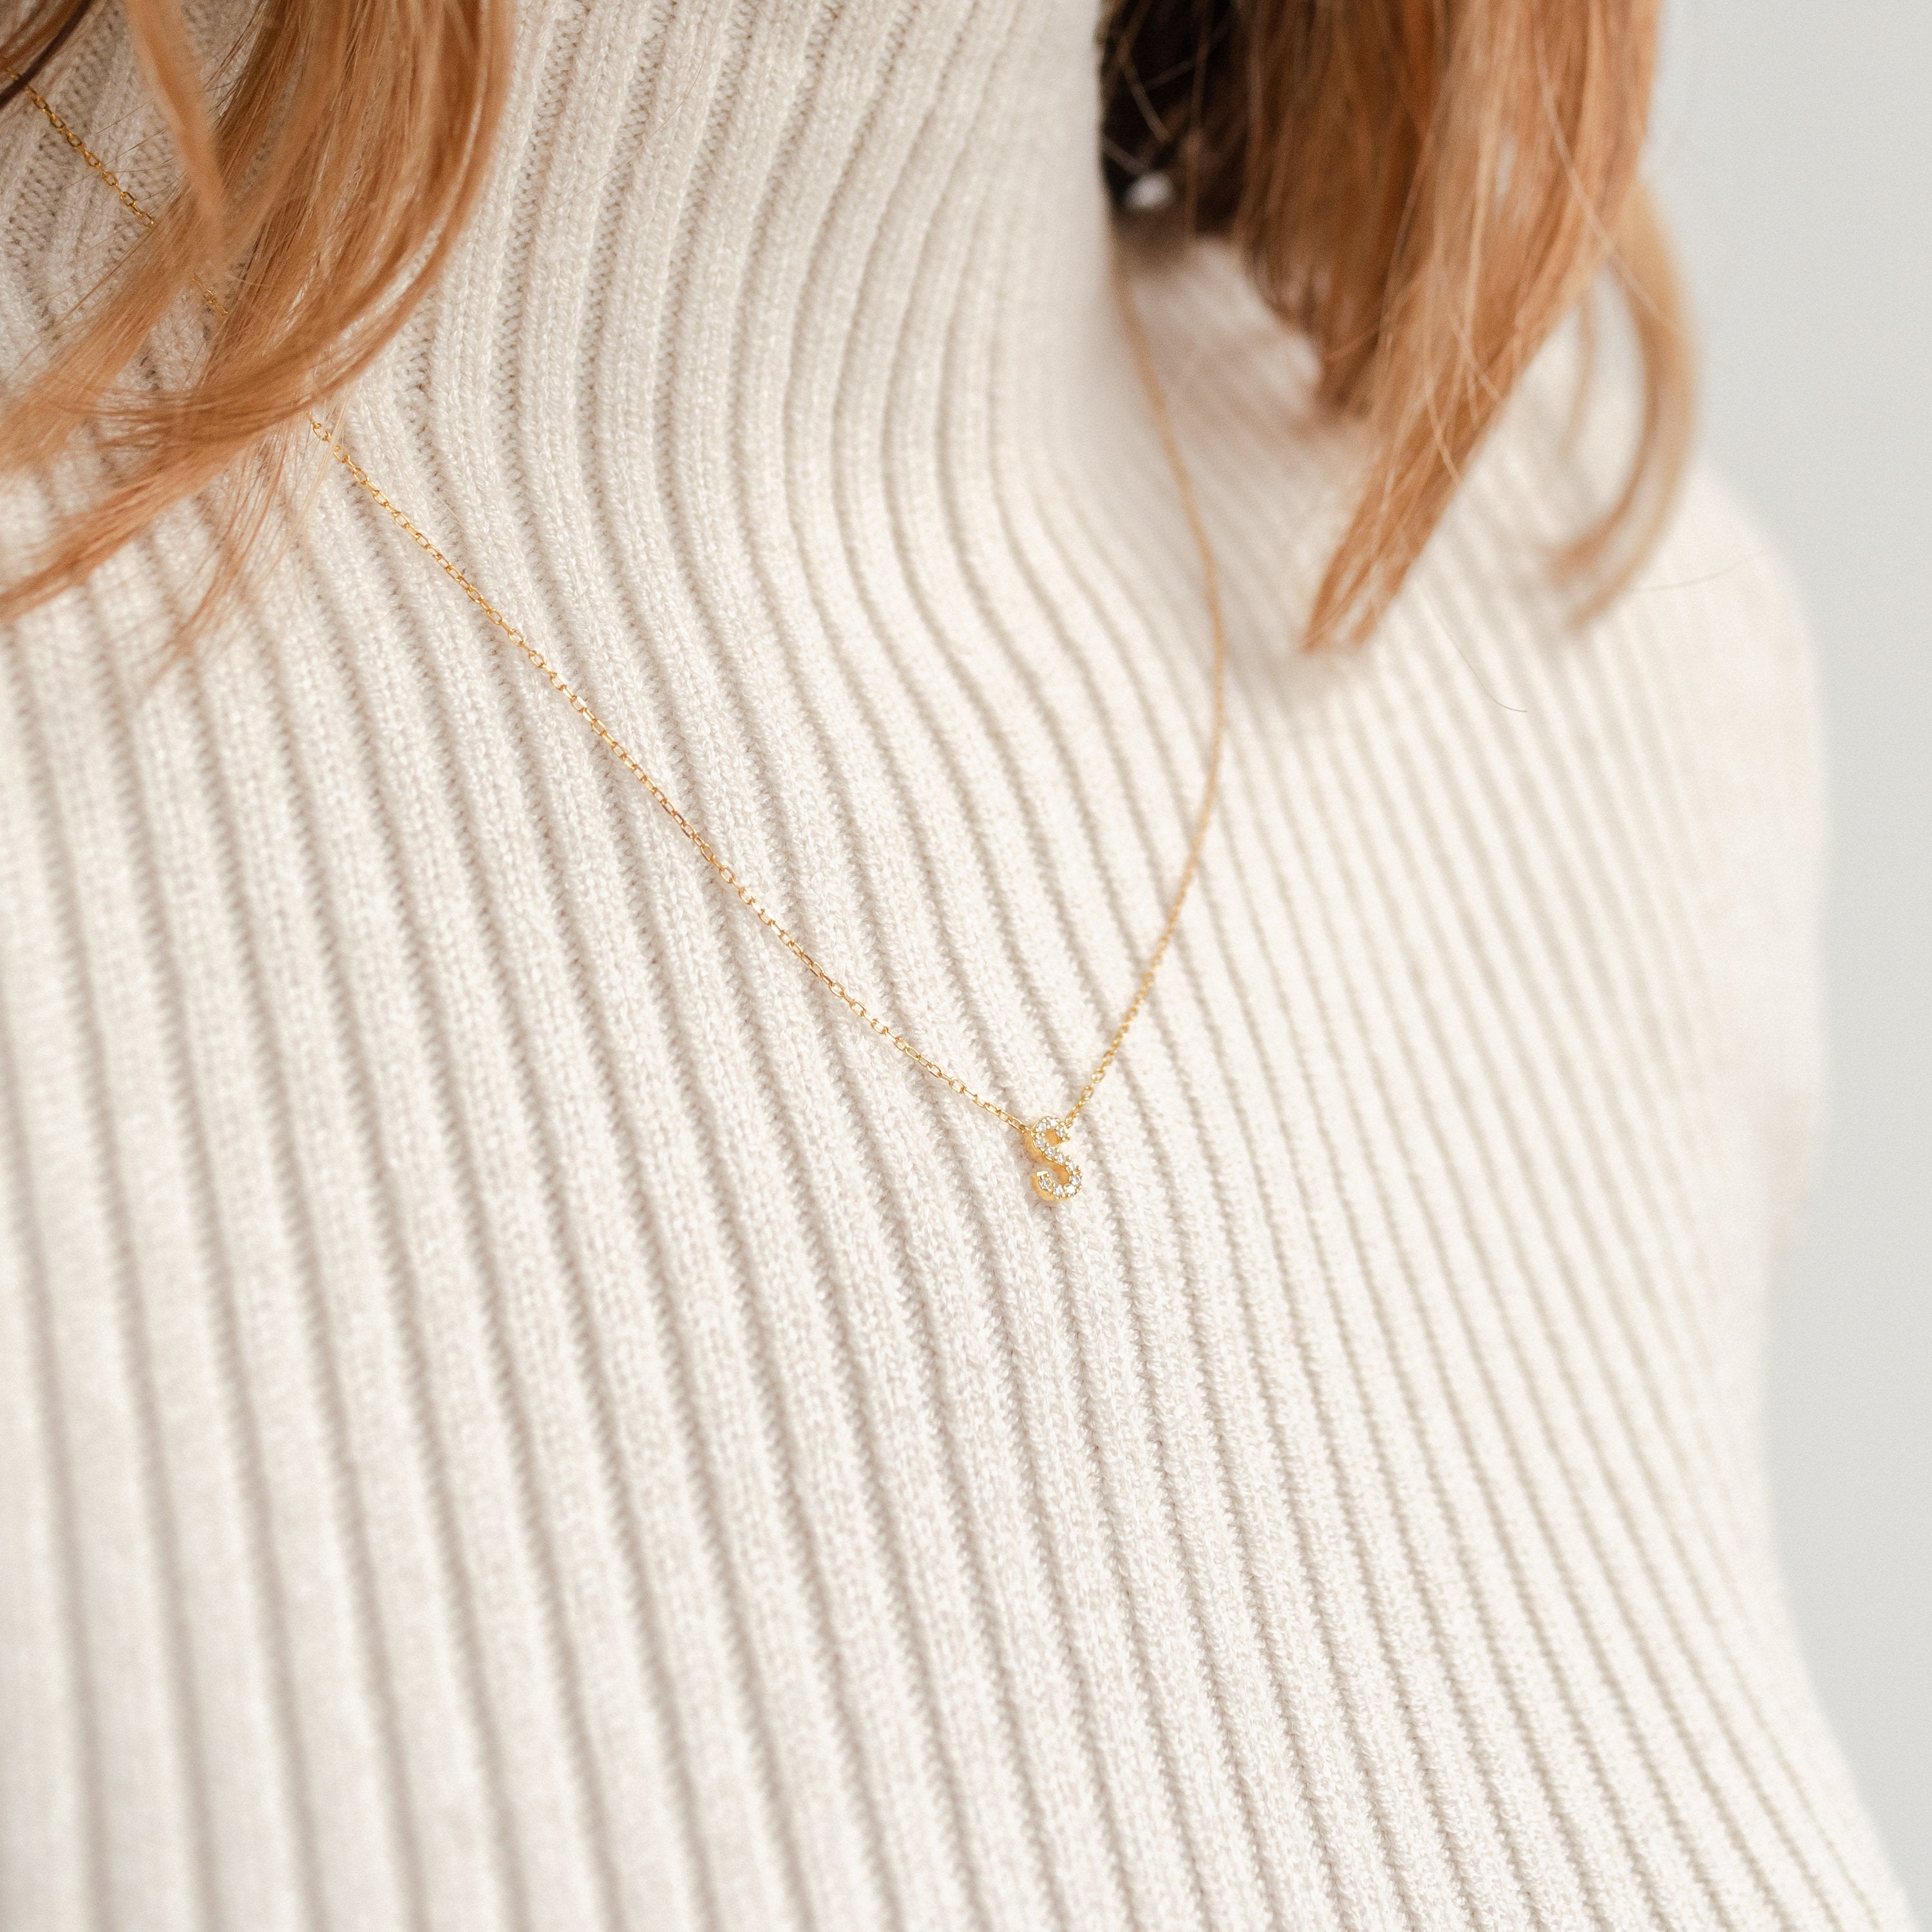 Pave Initial Necklace